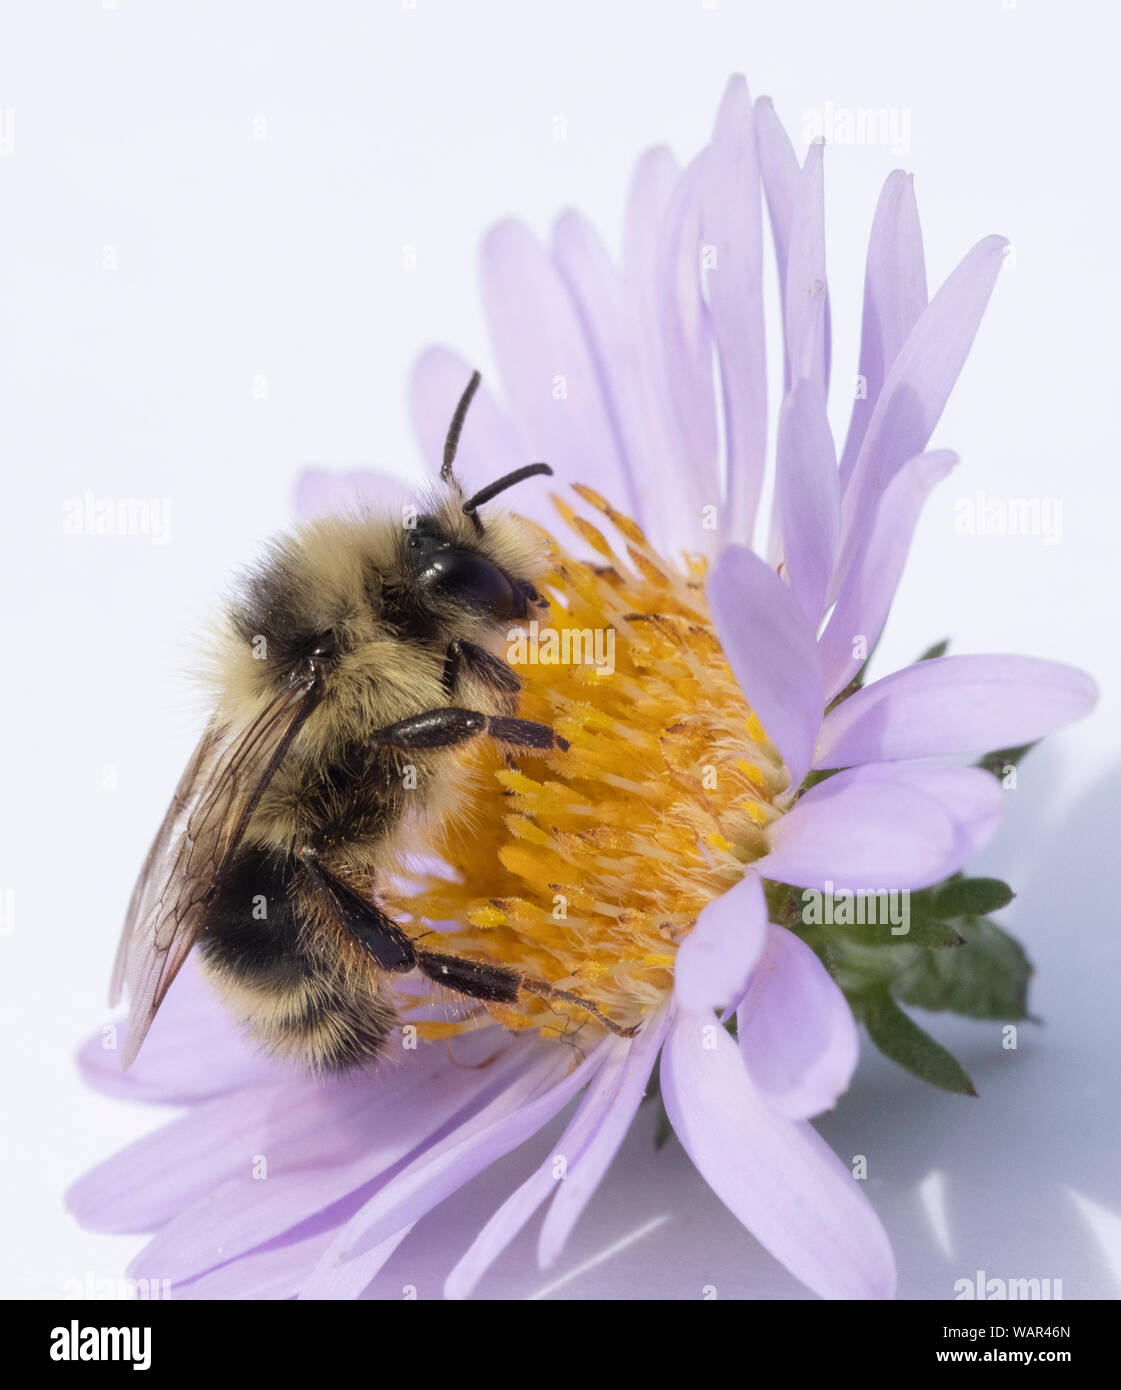 Bumble bee foraging on Aster flower Stock Photo